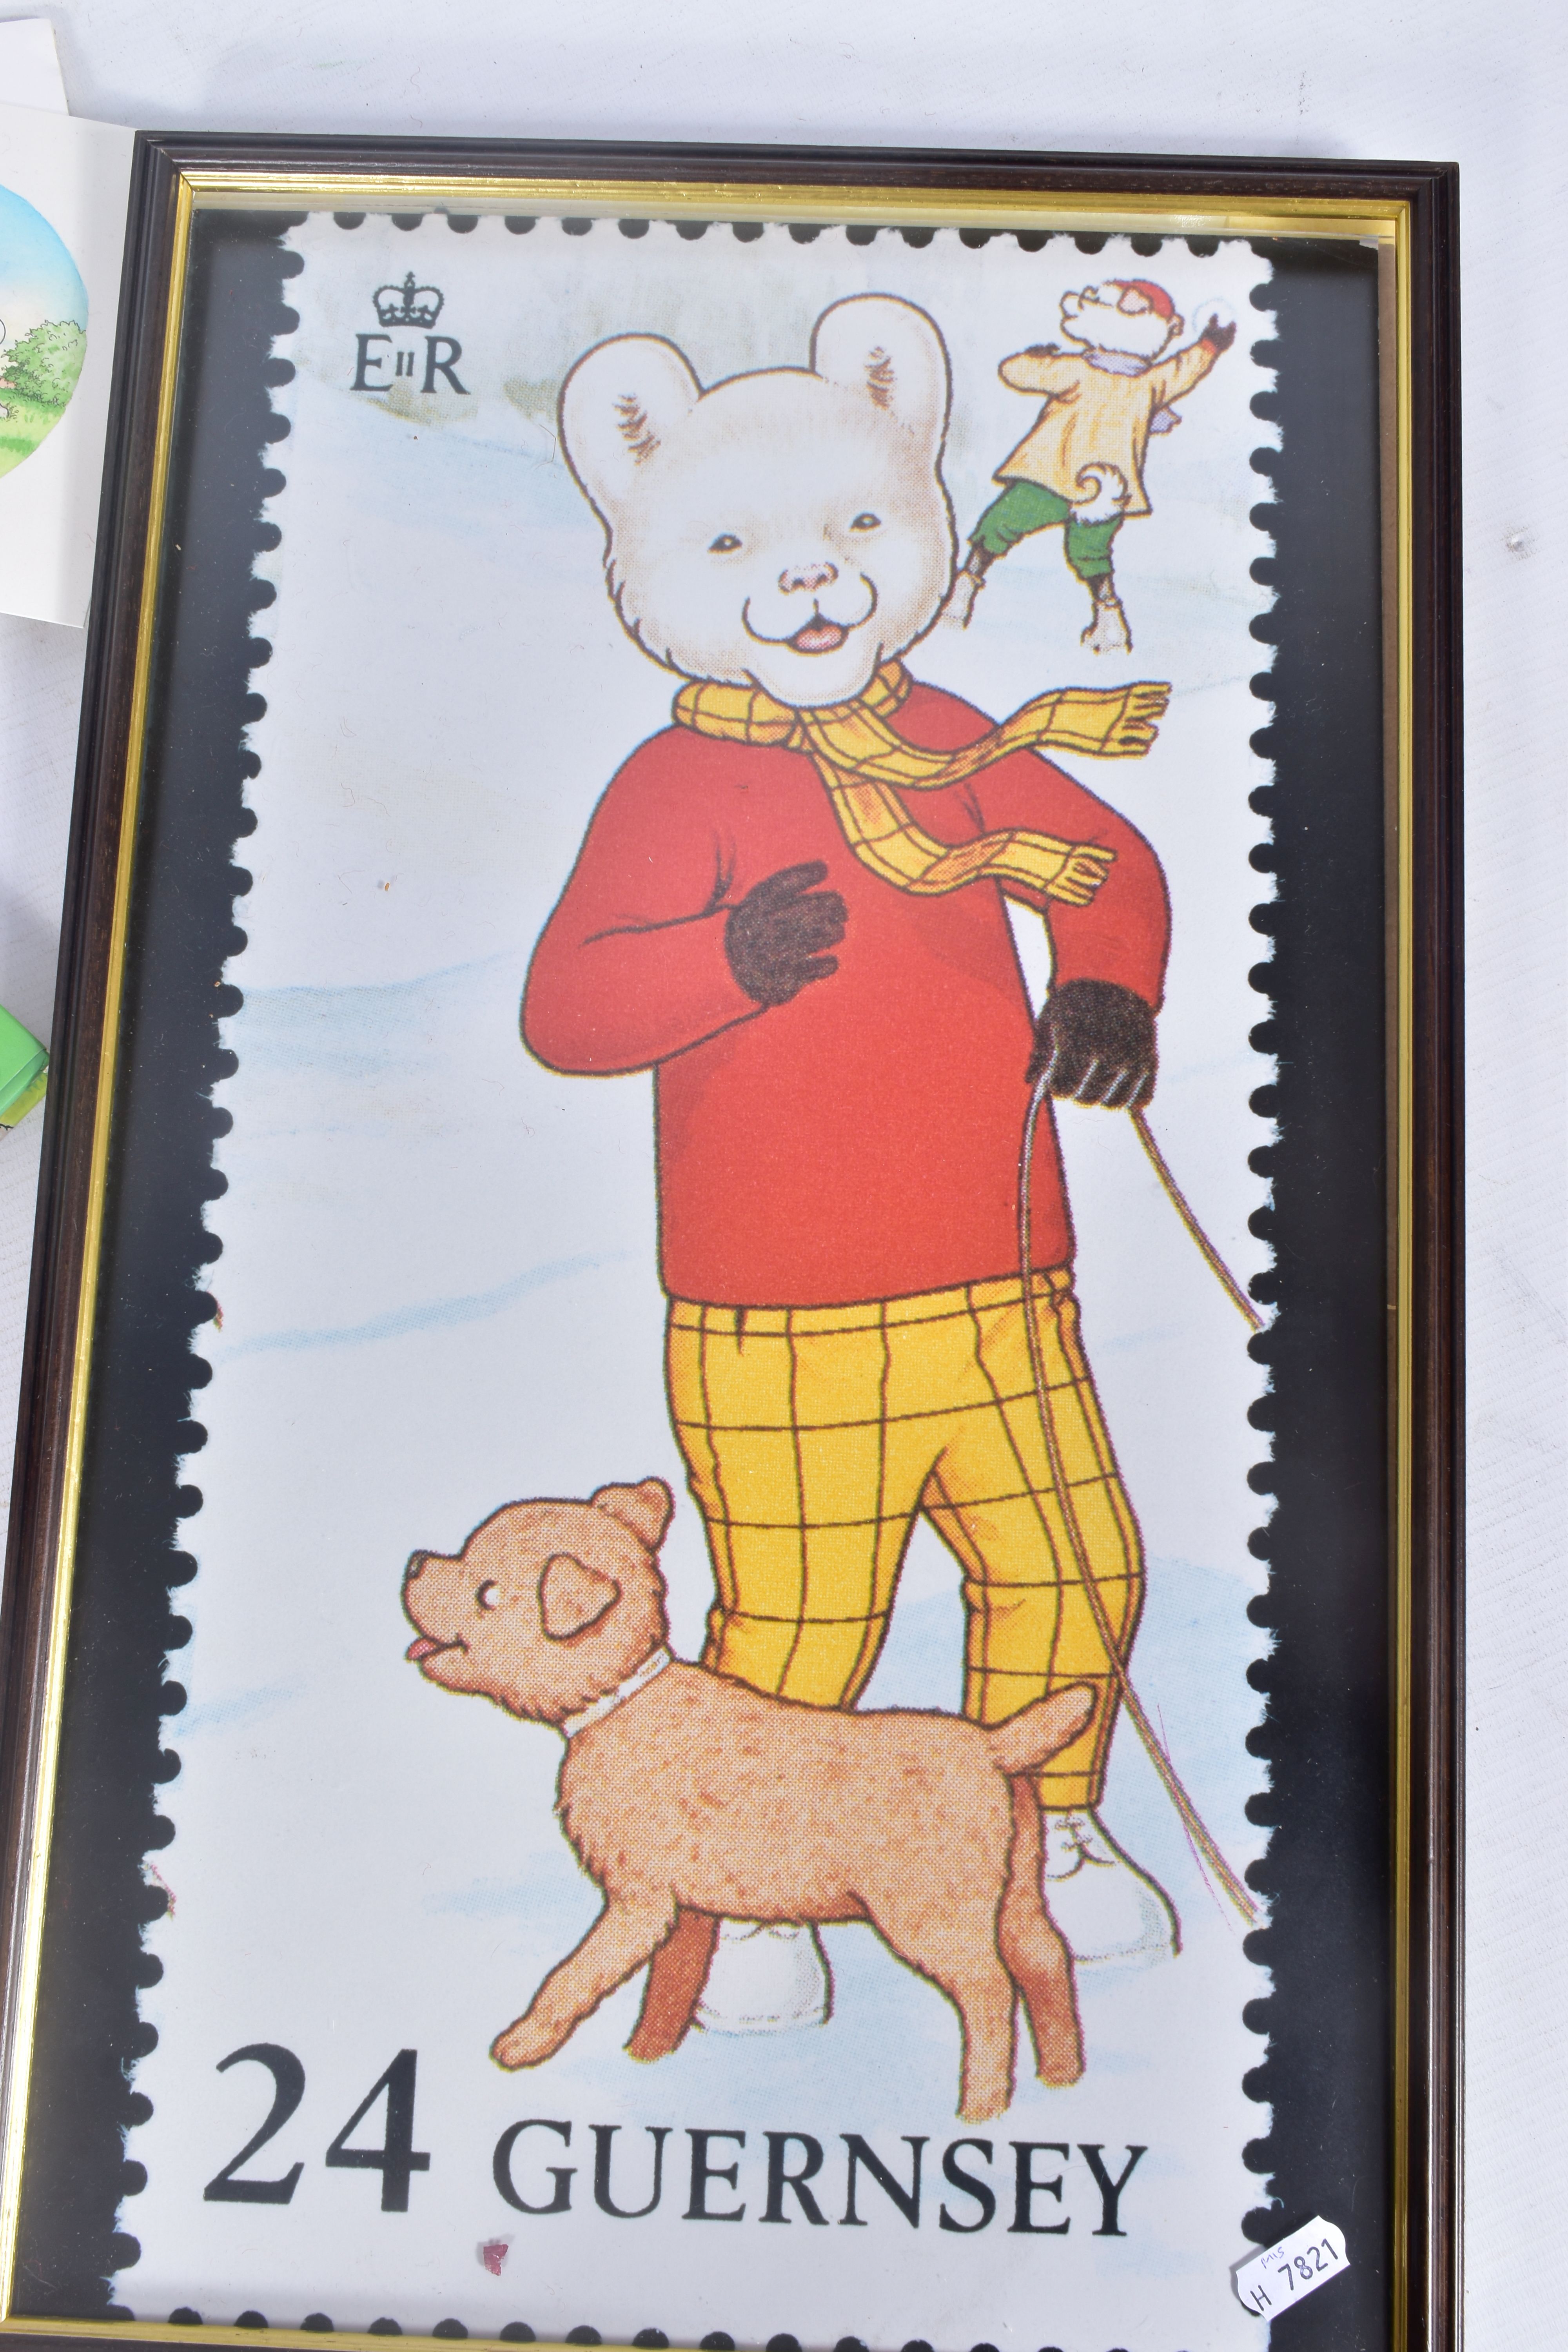 AFTER ALFRED BESTALL THREE SIGNED RUPERT THE BEAR PRINTS, three limited edition signed prints, - Image 11 of 26